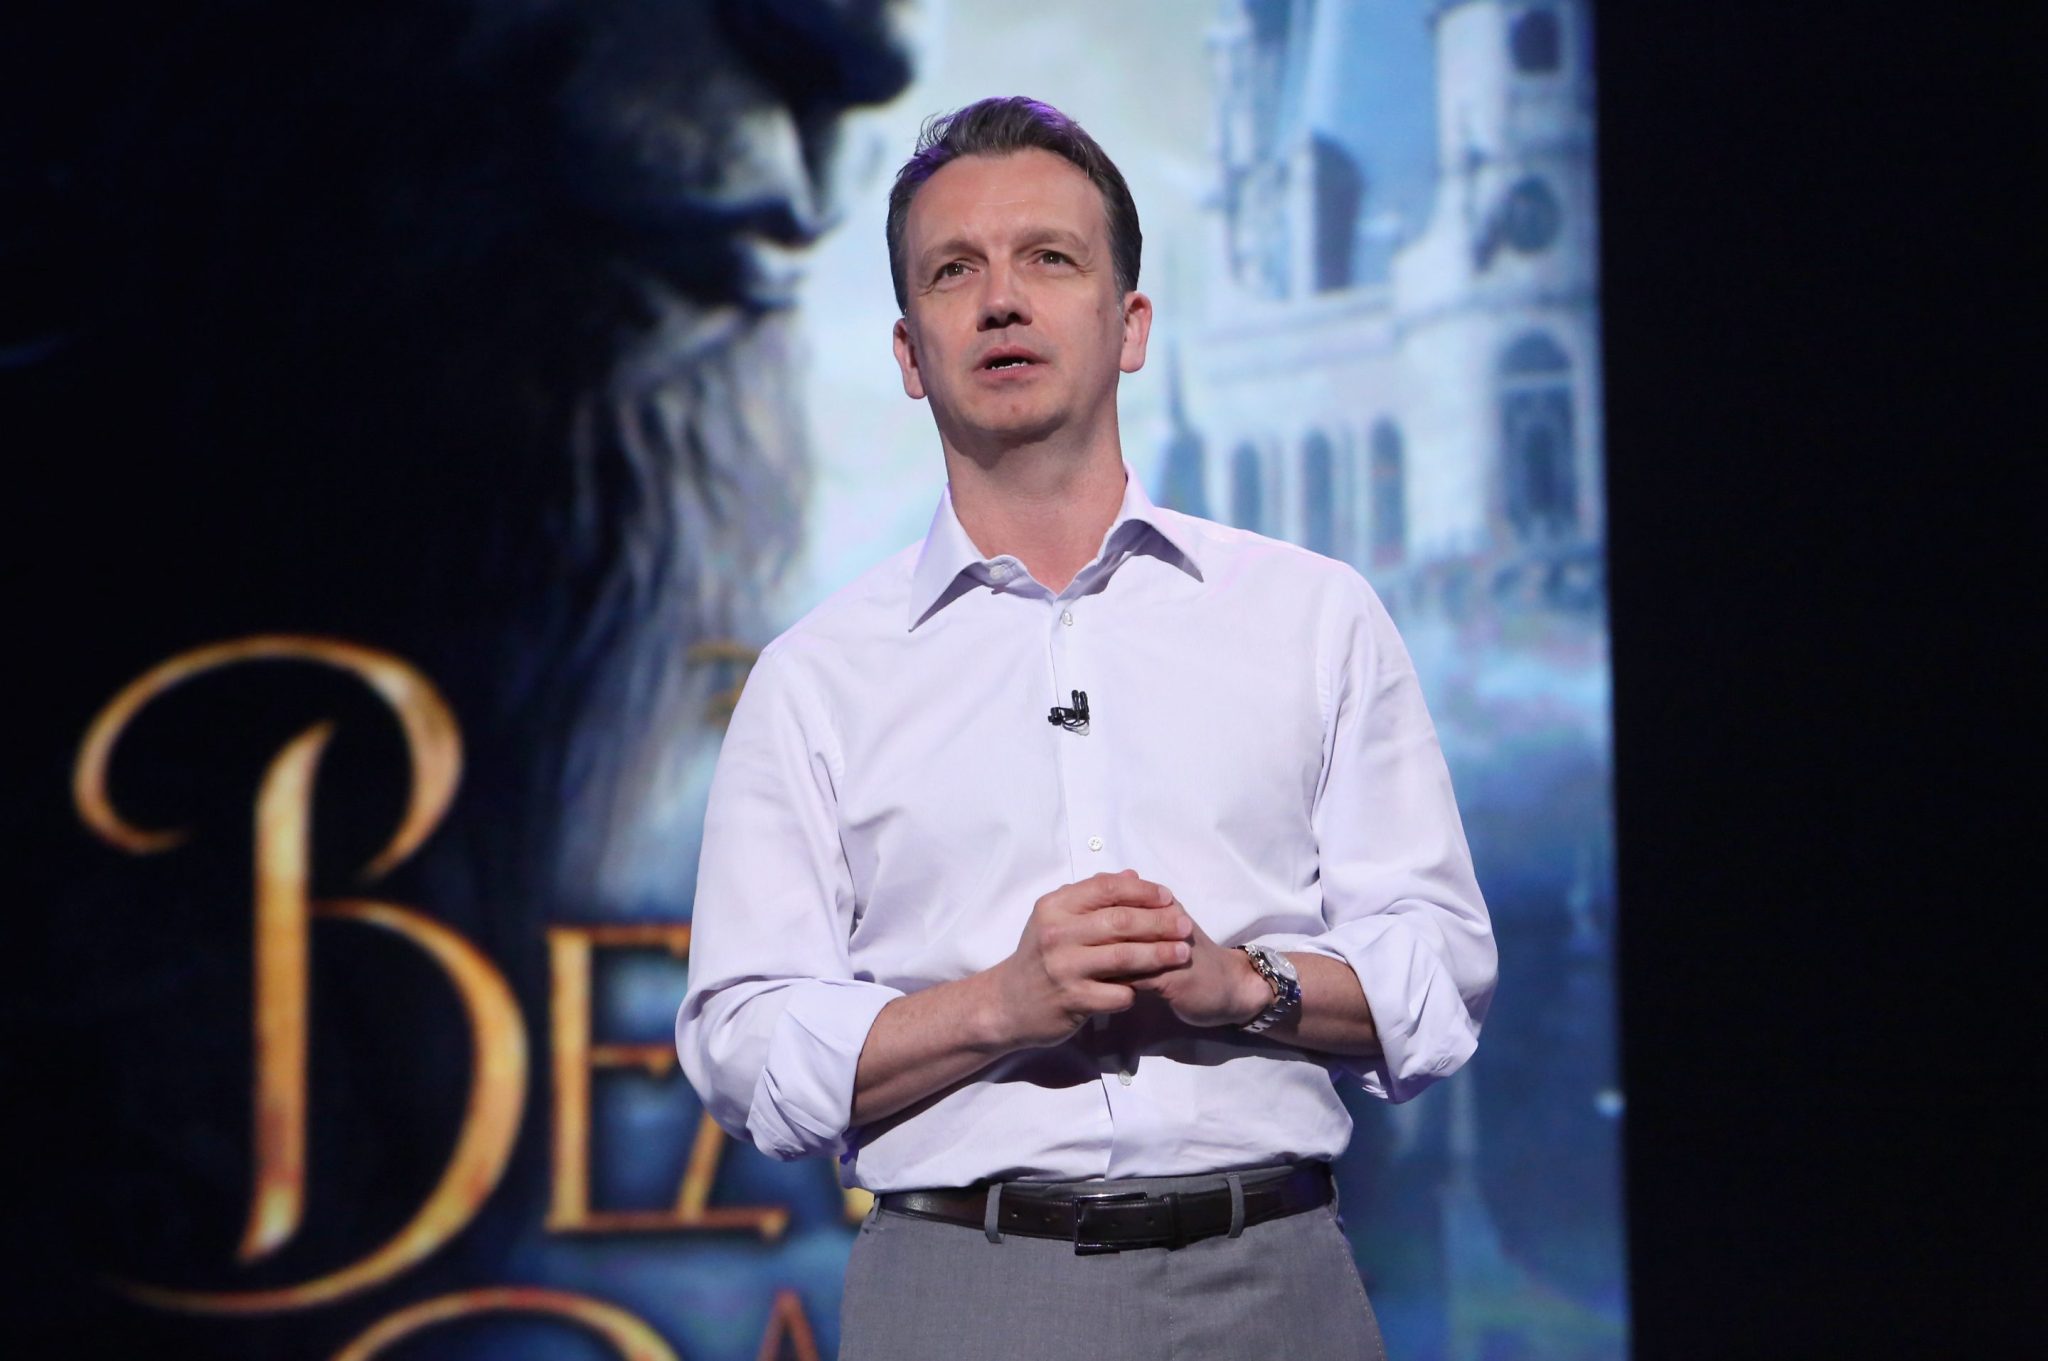 Disney’s live action movie boss is leaving as Bob Iger struggles with flops and proxy fight with Nelson Peltz